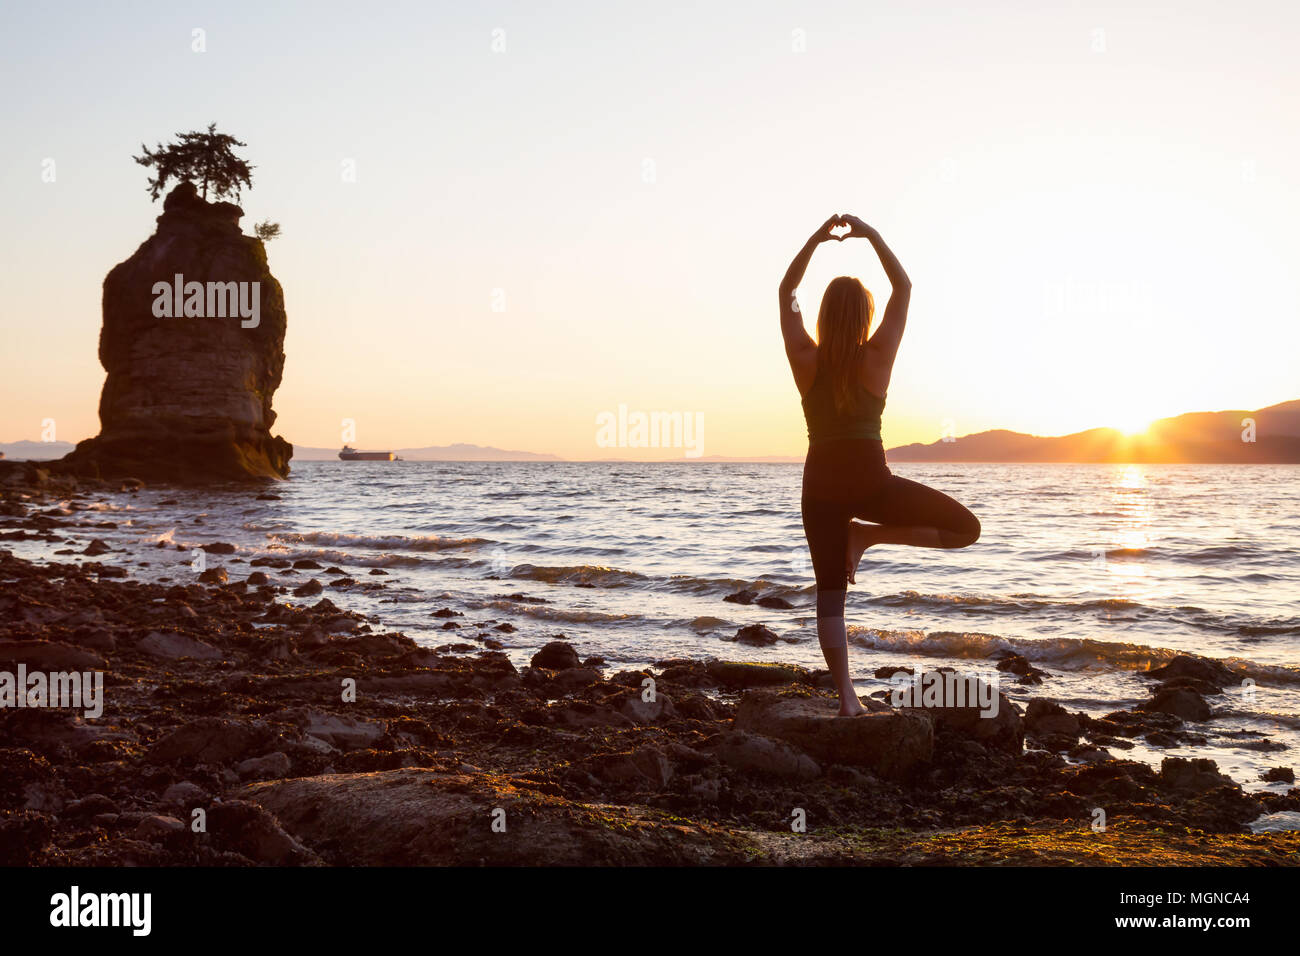 Young Woman practicing yoga on a rocky shore during a vibrant sunset. Taken in Stanley Park, Vancouver, British Columbia, Canada. Stock Photo